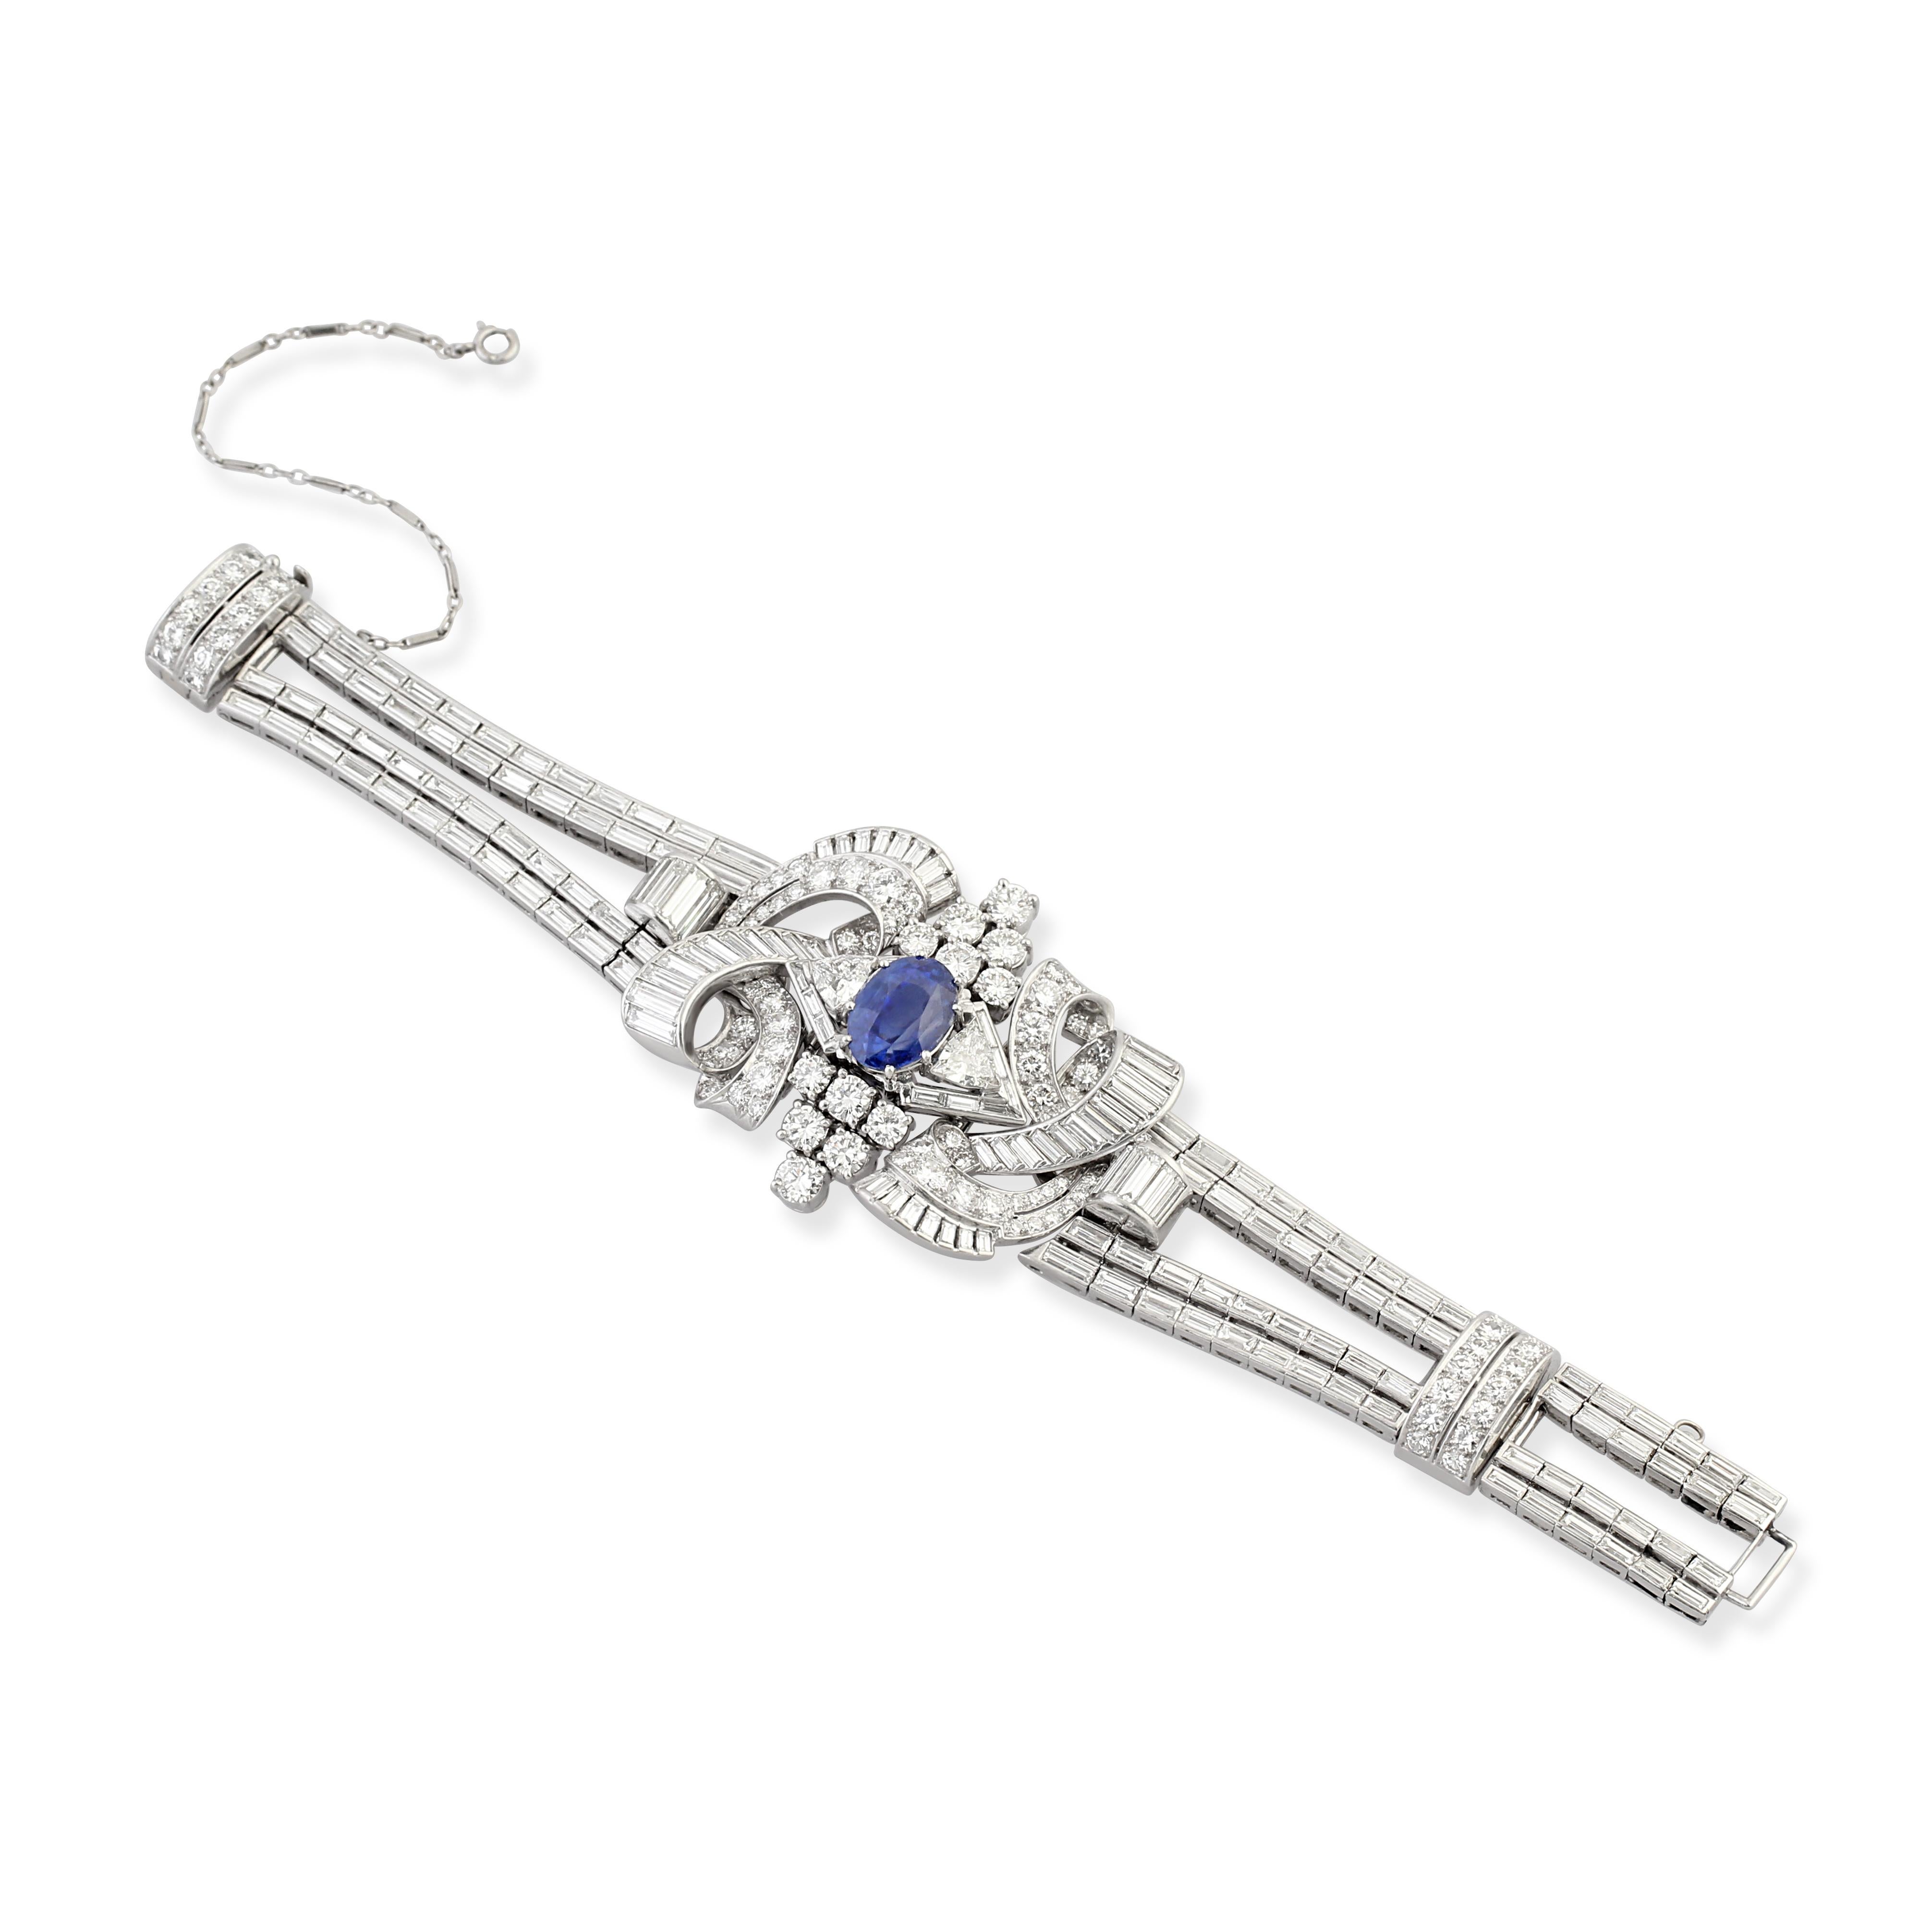 An elegant sapphire and diamond bracelet. Set at the centre with a 9.30ct Ceylon, unheated sapphire surrounded by baguette and round-cut diamonds.
